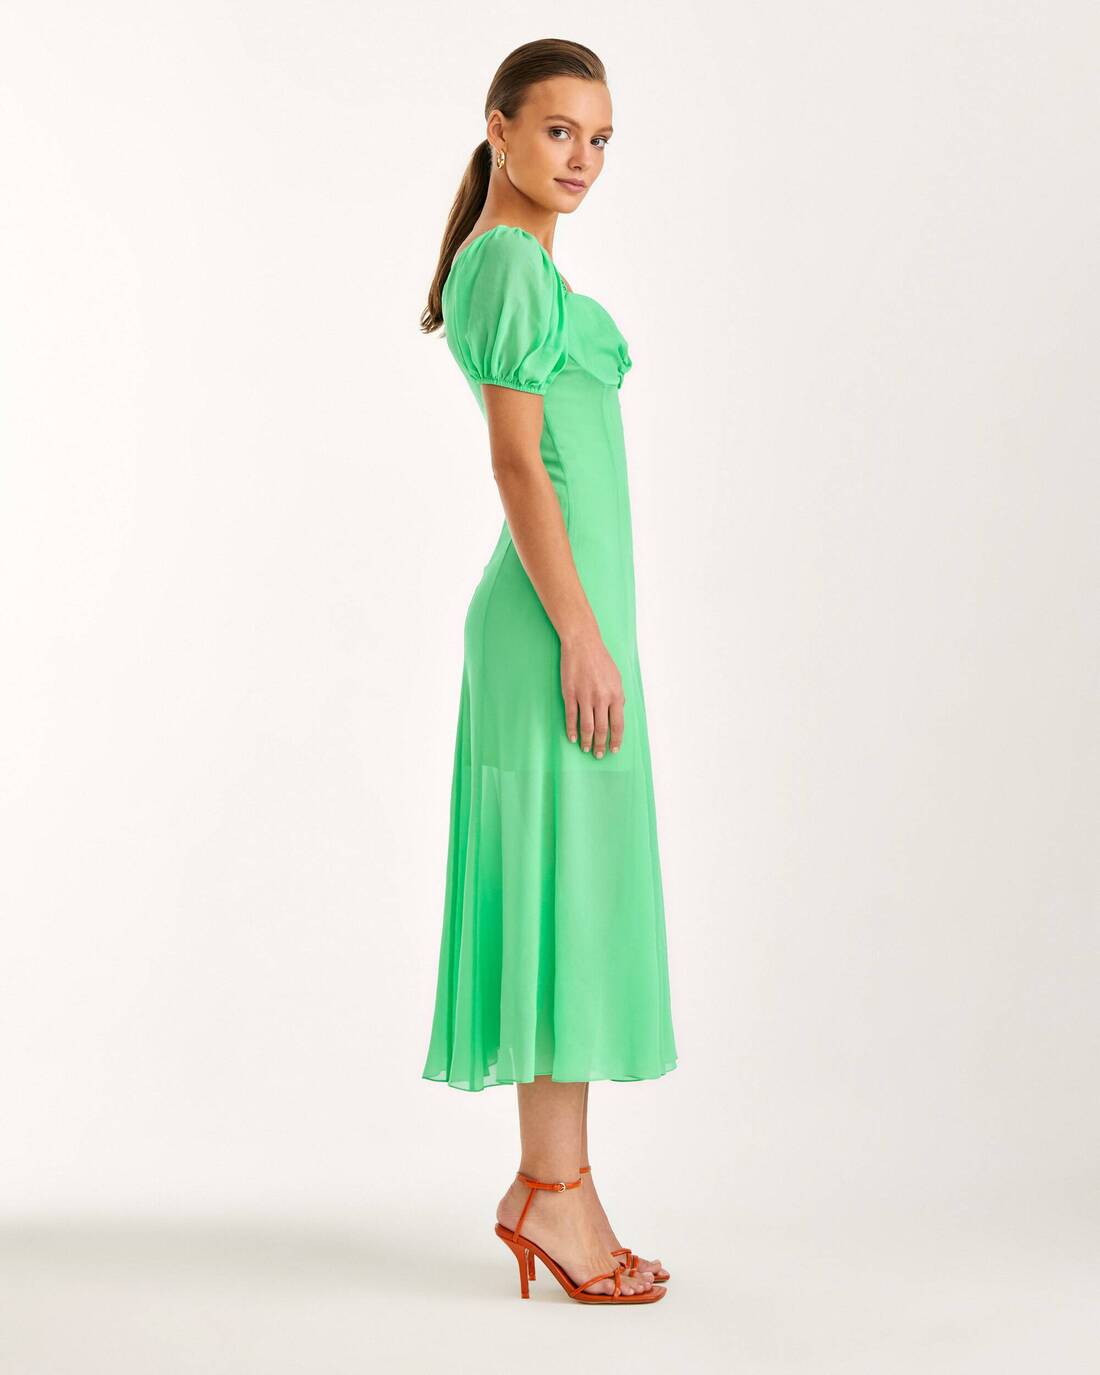 Airy midi dress with puff sleeves